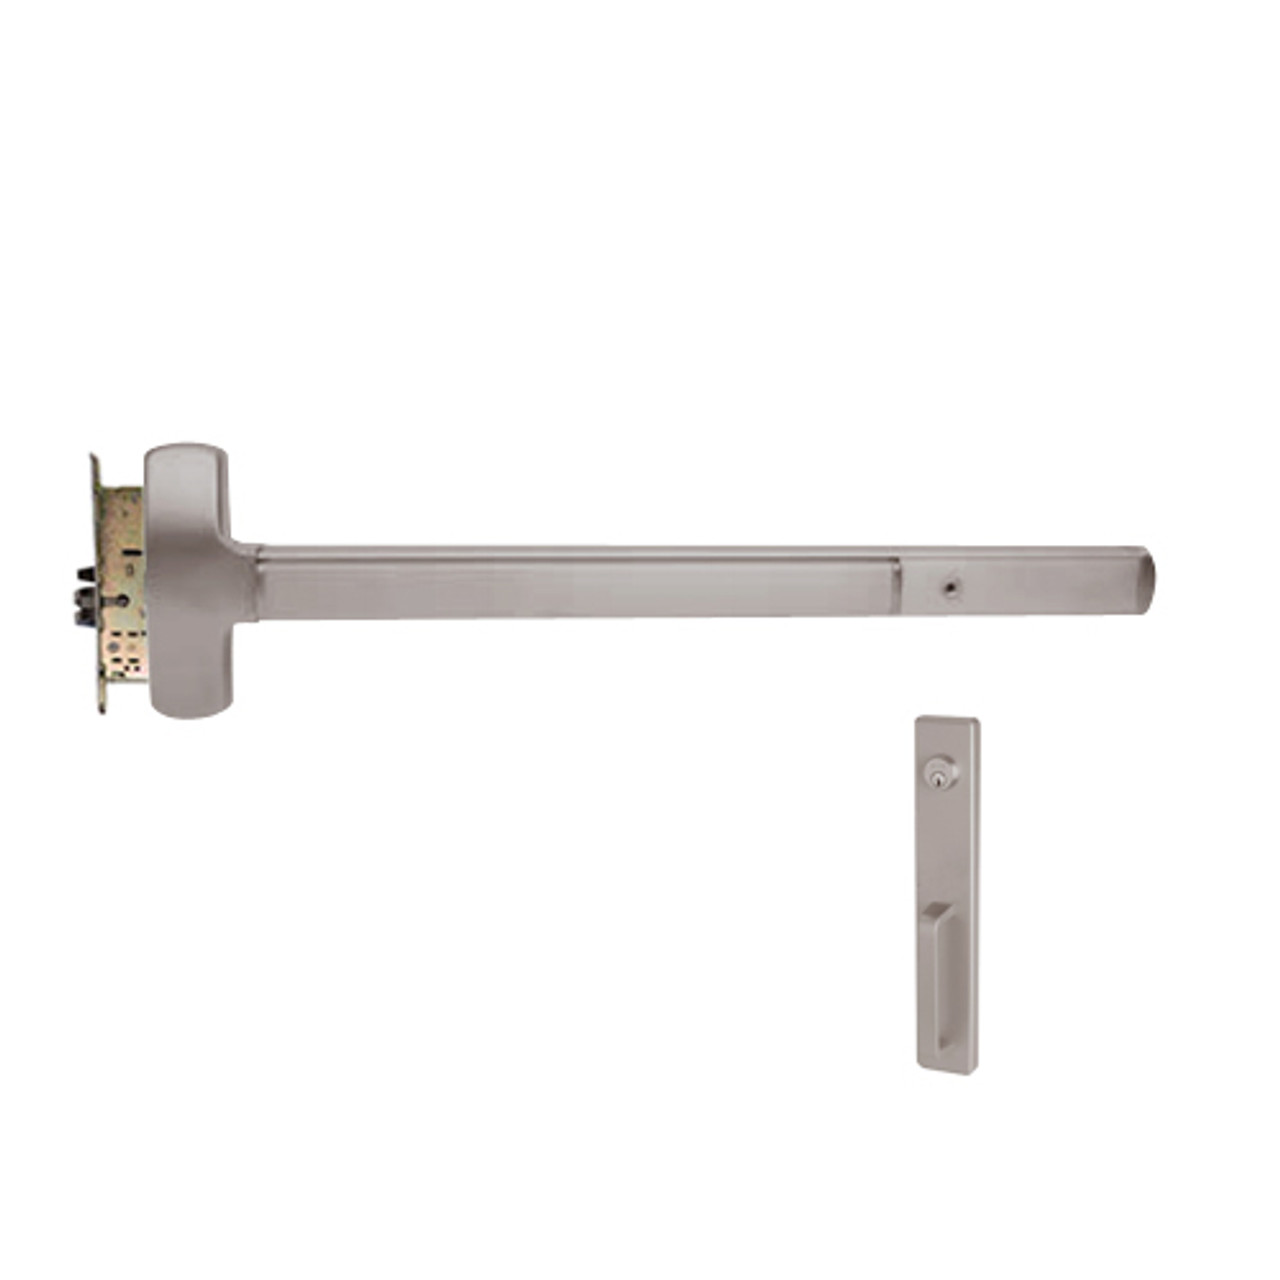 25-M-NL-US28-4-LHR Falcon Exit Device in Anodized Aluminum